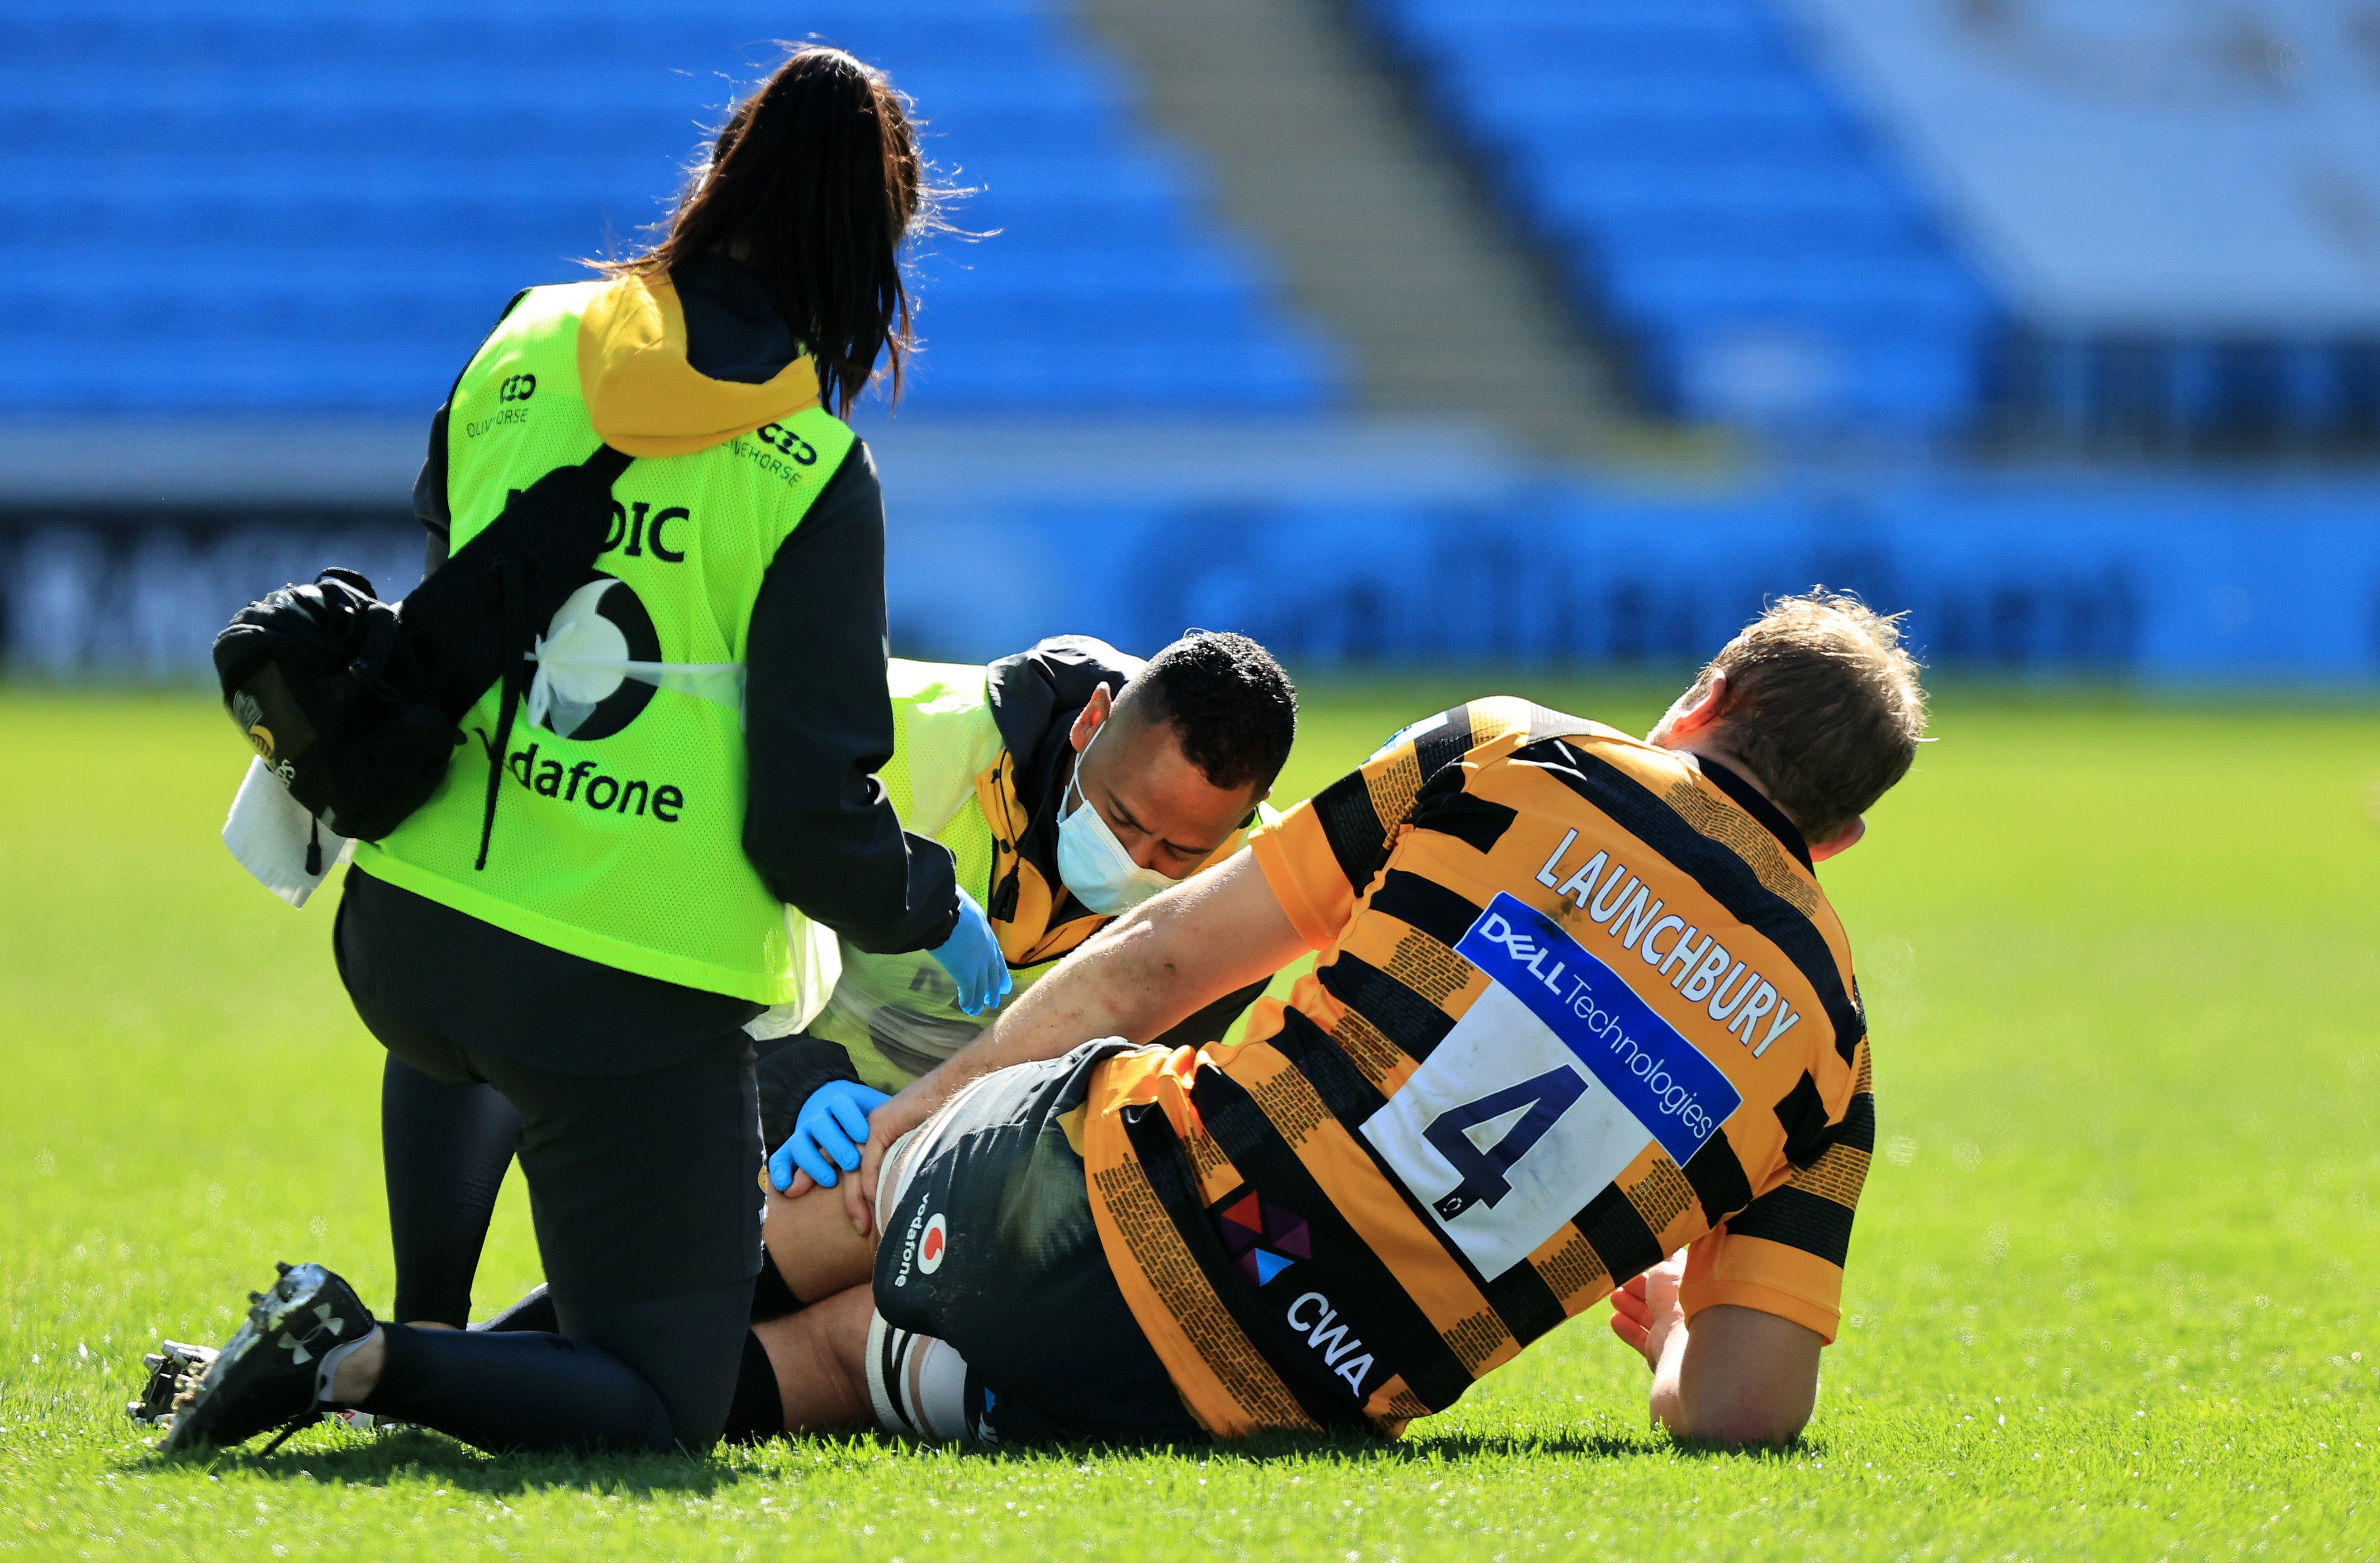 Joe Launchbury suffered the injury while playing for Premiership side Wasps